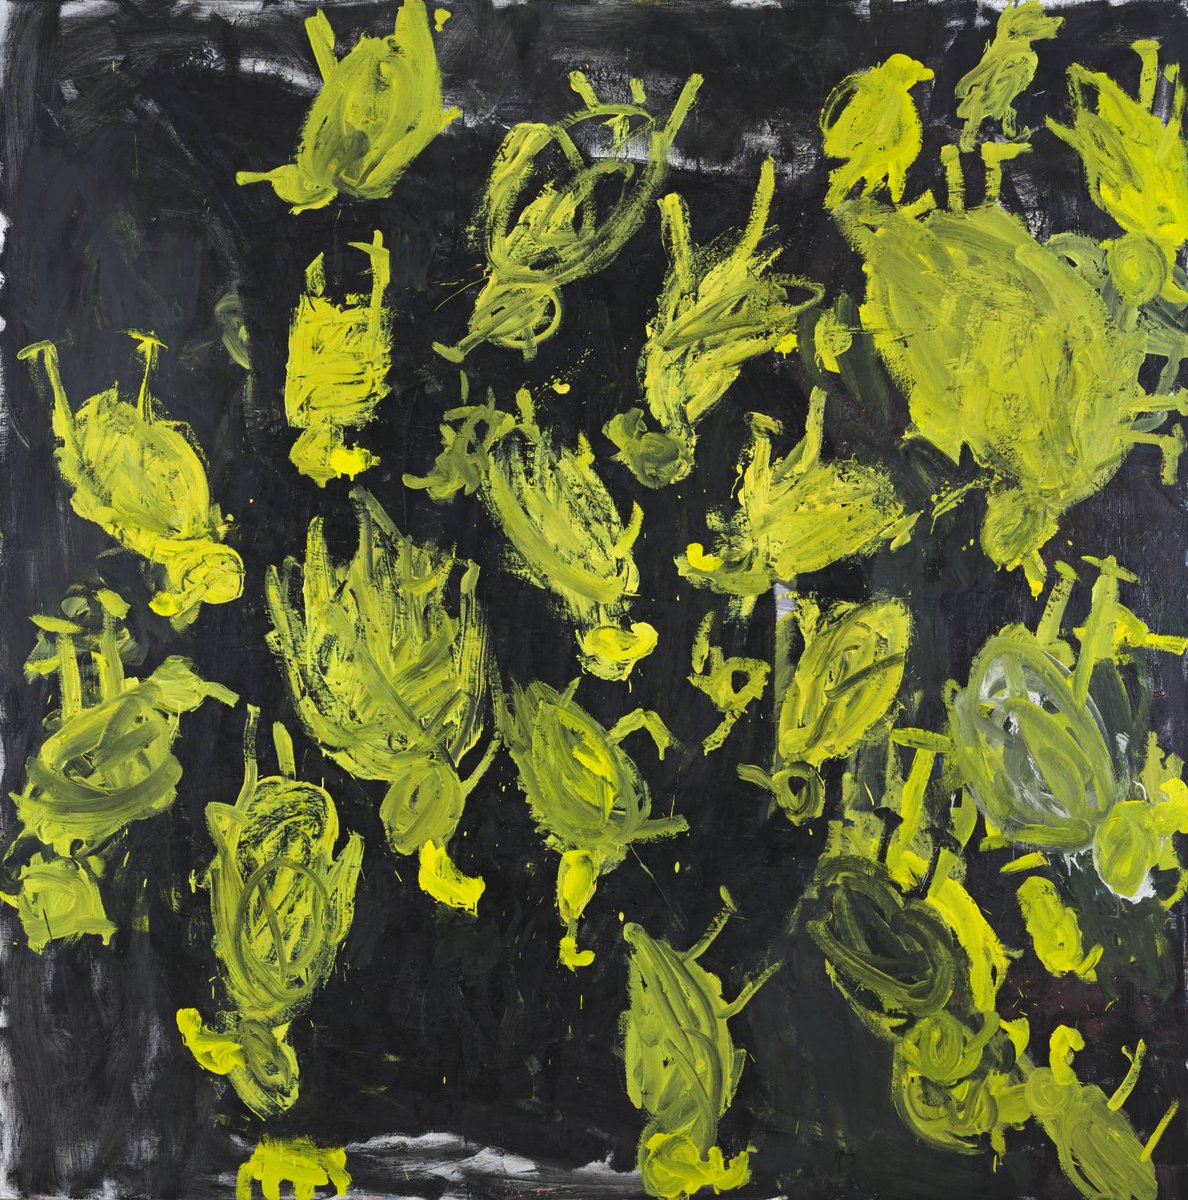 #HappyBirthday Georg Baselitz! With a career spanning over six decades, Baselitz (b. 1938, Germany) first came to prominence in post-war Germany as a painter. 'Where is the Yellow Milk Jug, Mrs Bird?' belong to a series of works the artist made in 1989.